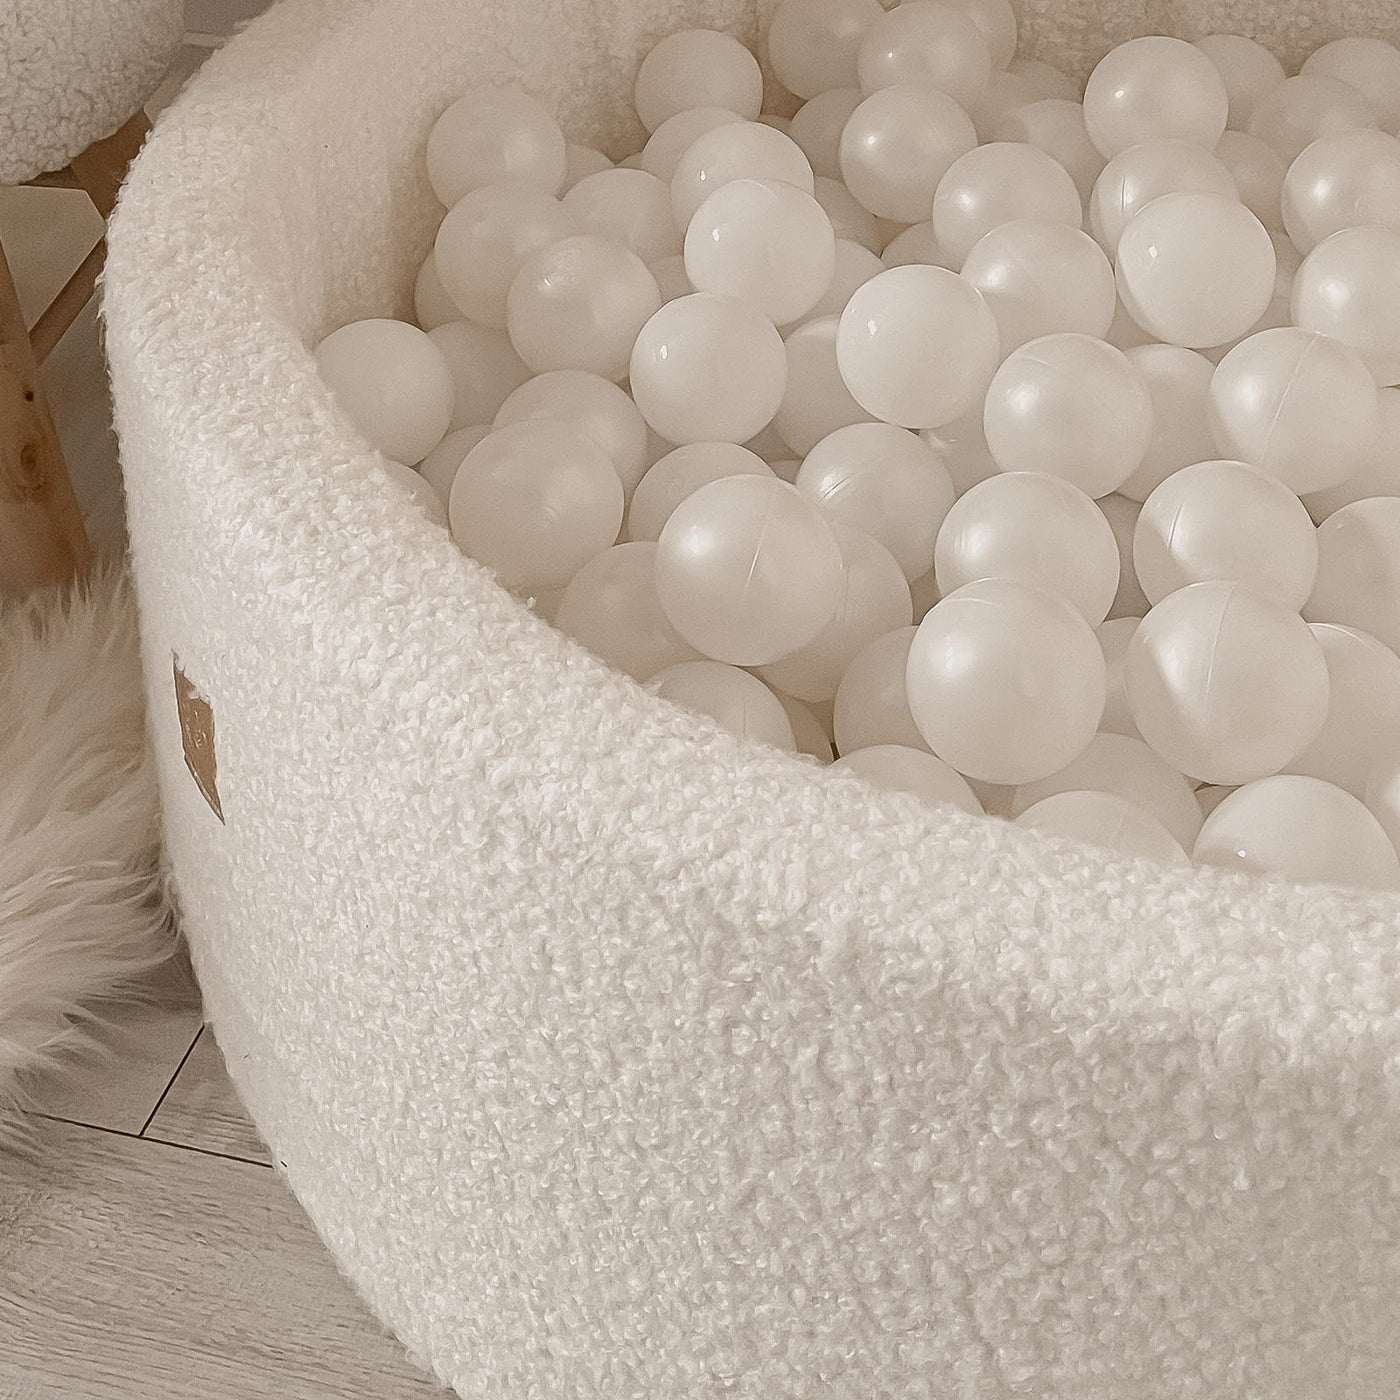 Make Your Own Ball Pit | White Boucle